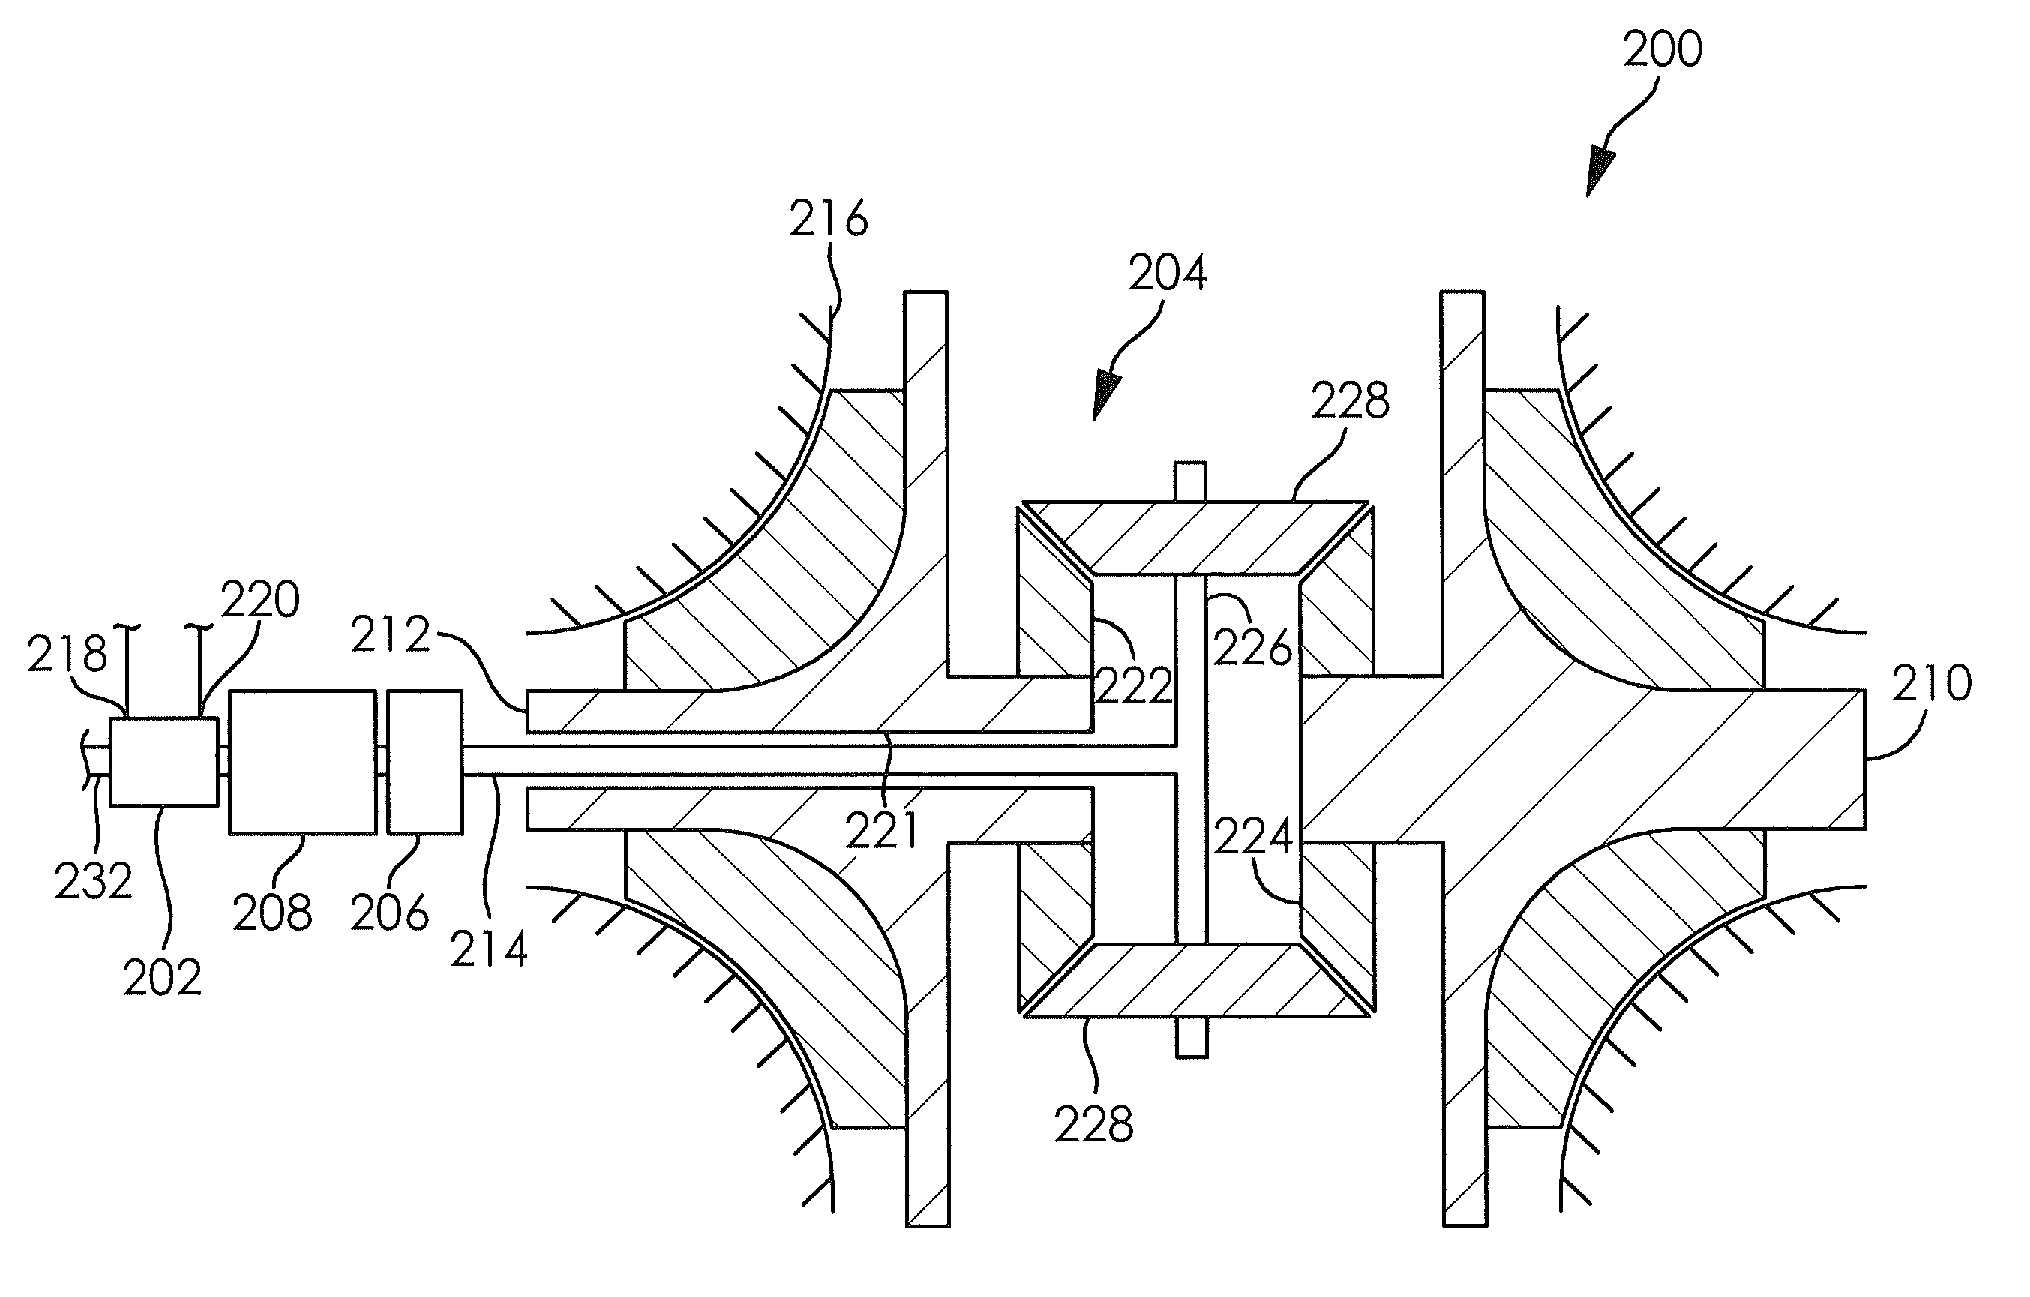 Internal combustion engine coupled turbocharger with an infinitely variable transmission